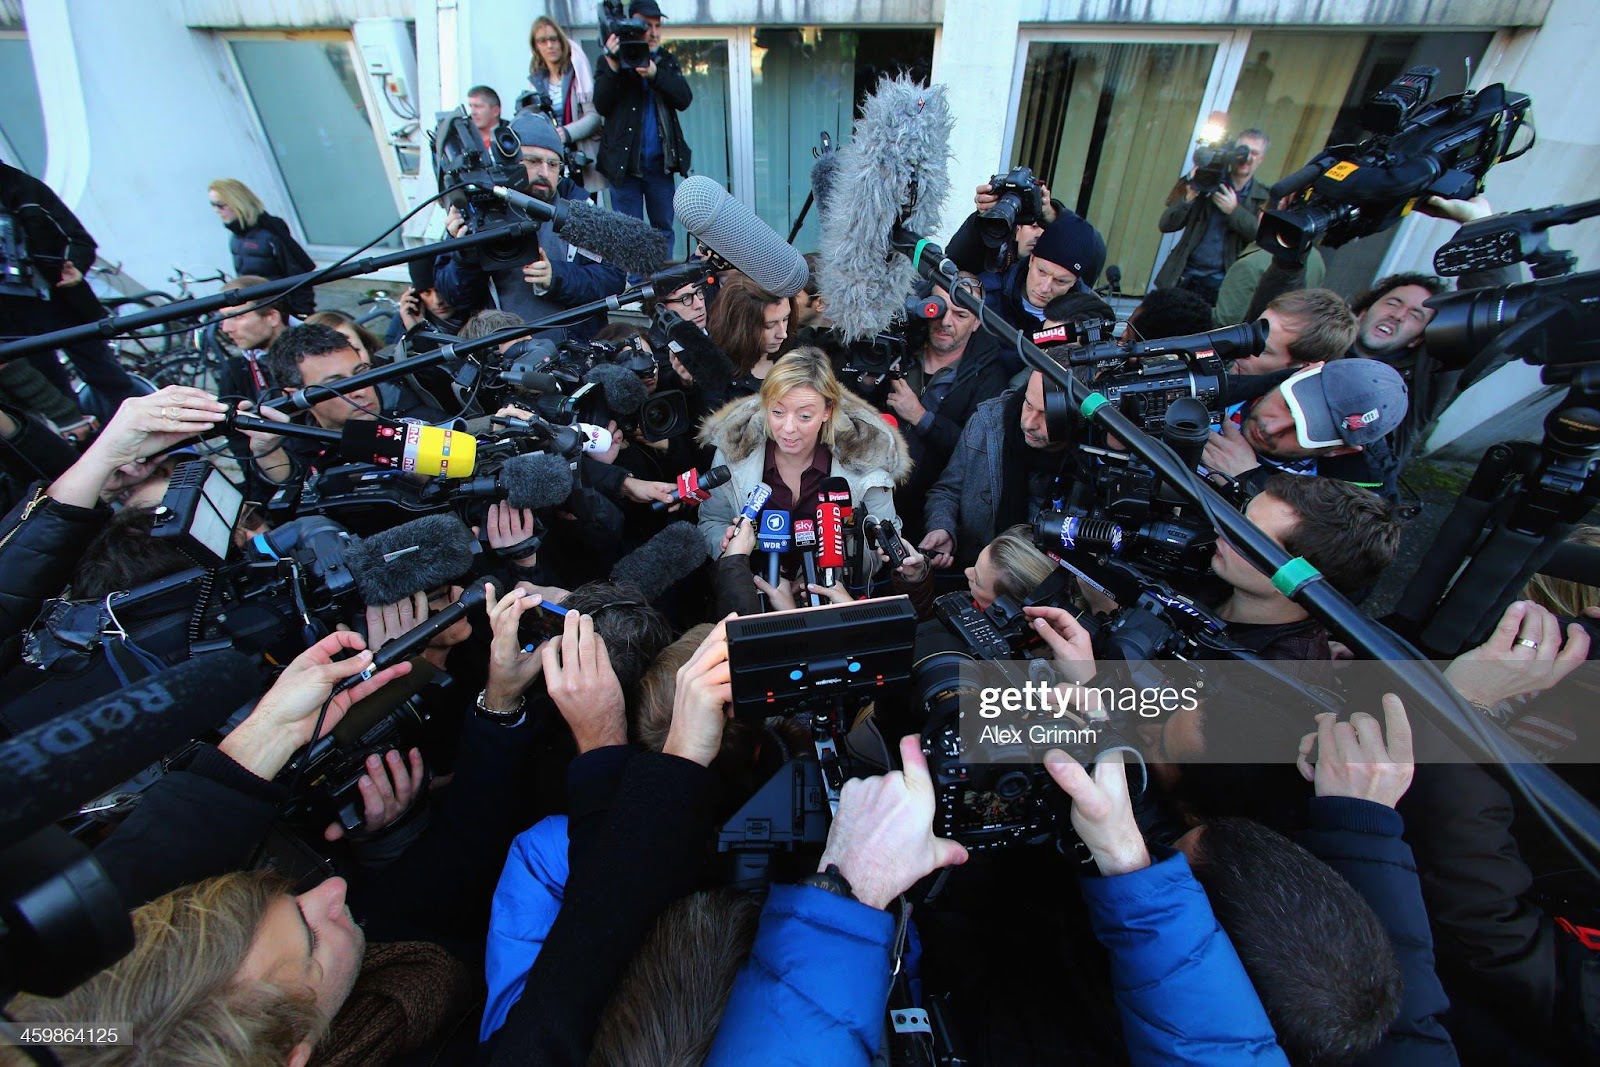 Sabine Kehm, press officer of former German F1 driver Michael Schumacher, talks to the media outside the Grenoble University Hospital Centre where Schumacher is being treated for a severe head injury following a skiing accident on Sunday in Meribel on January 1, 2014 in Grenoble, France.